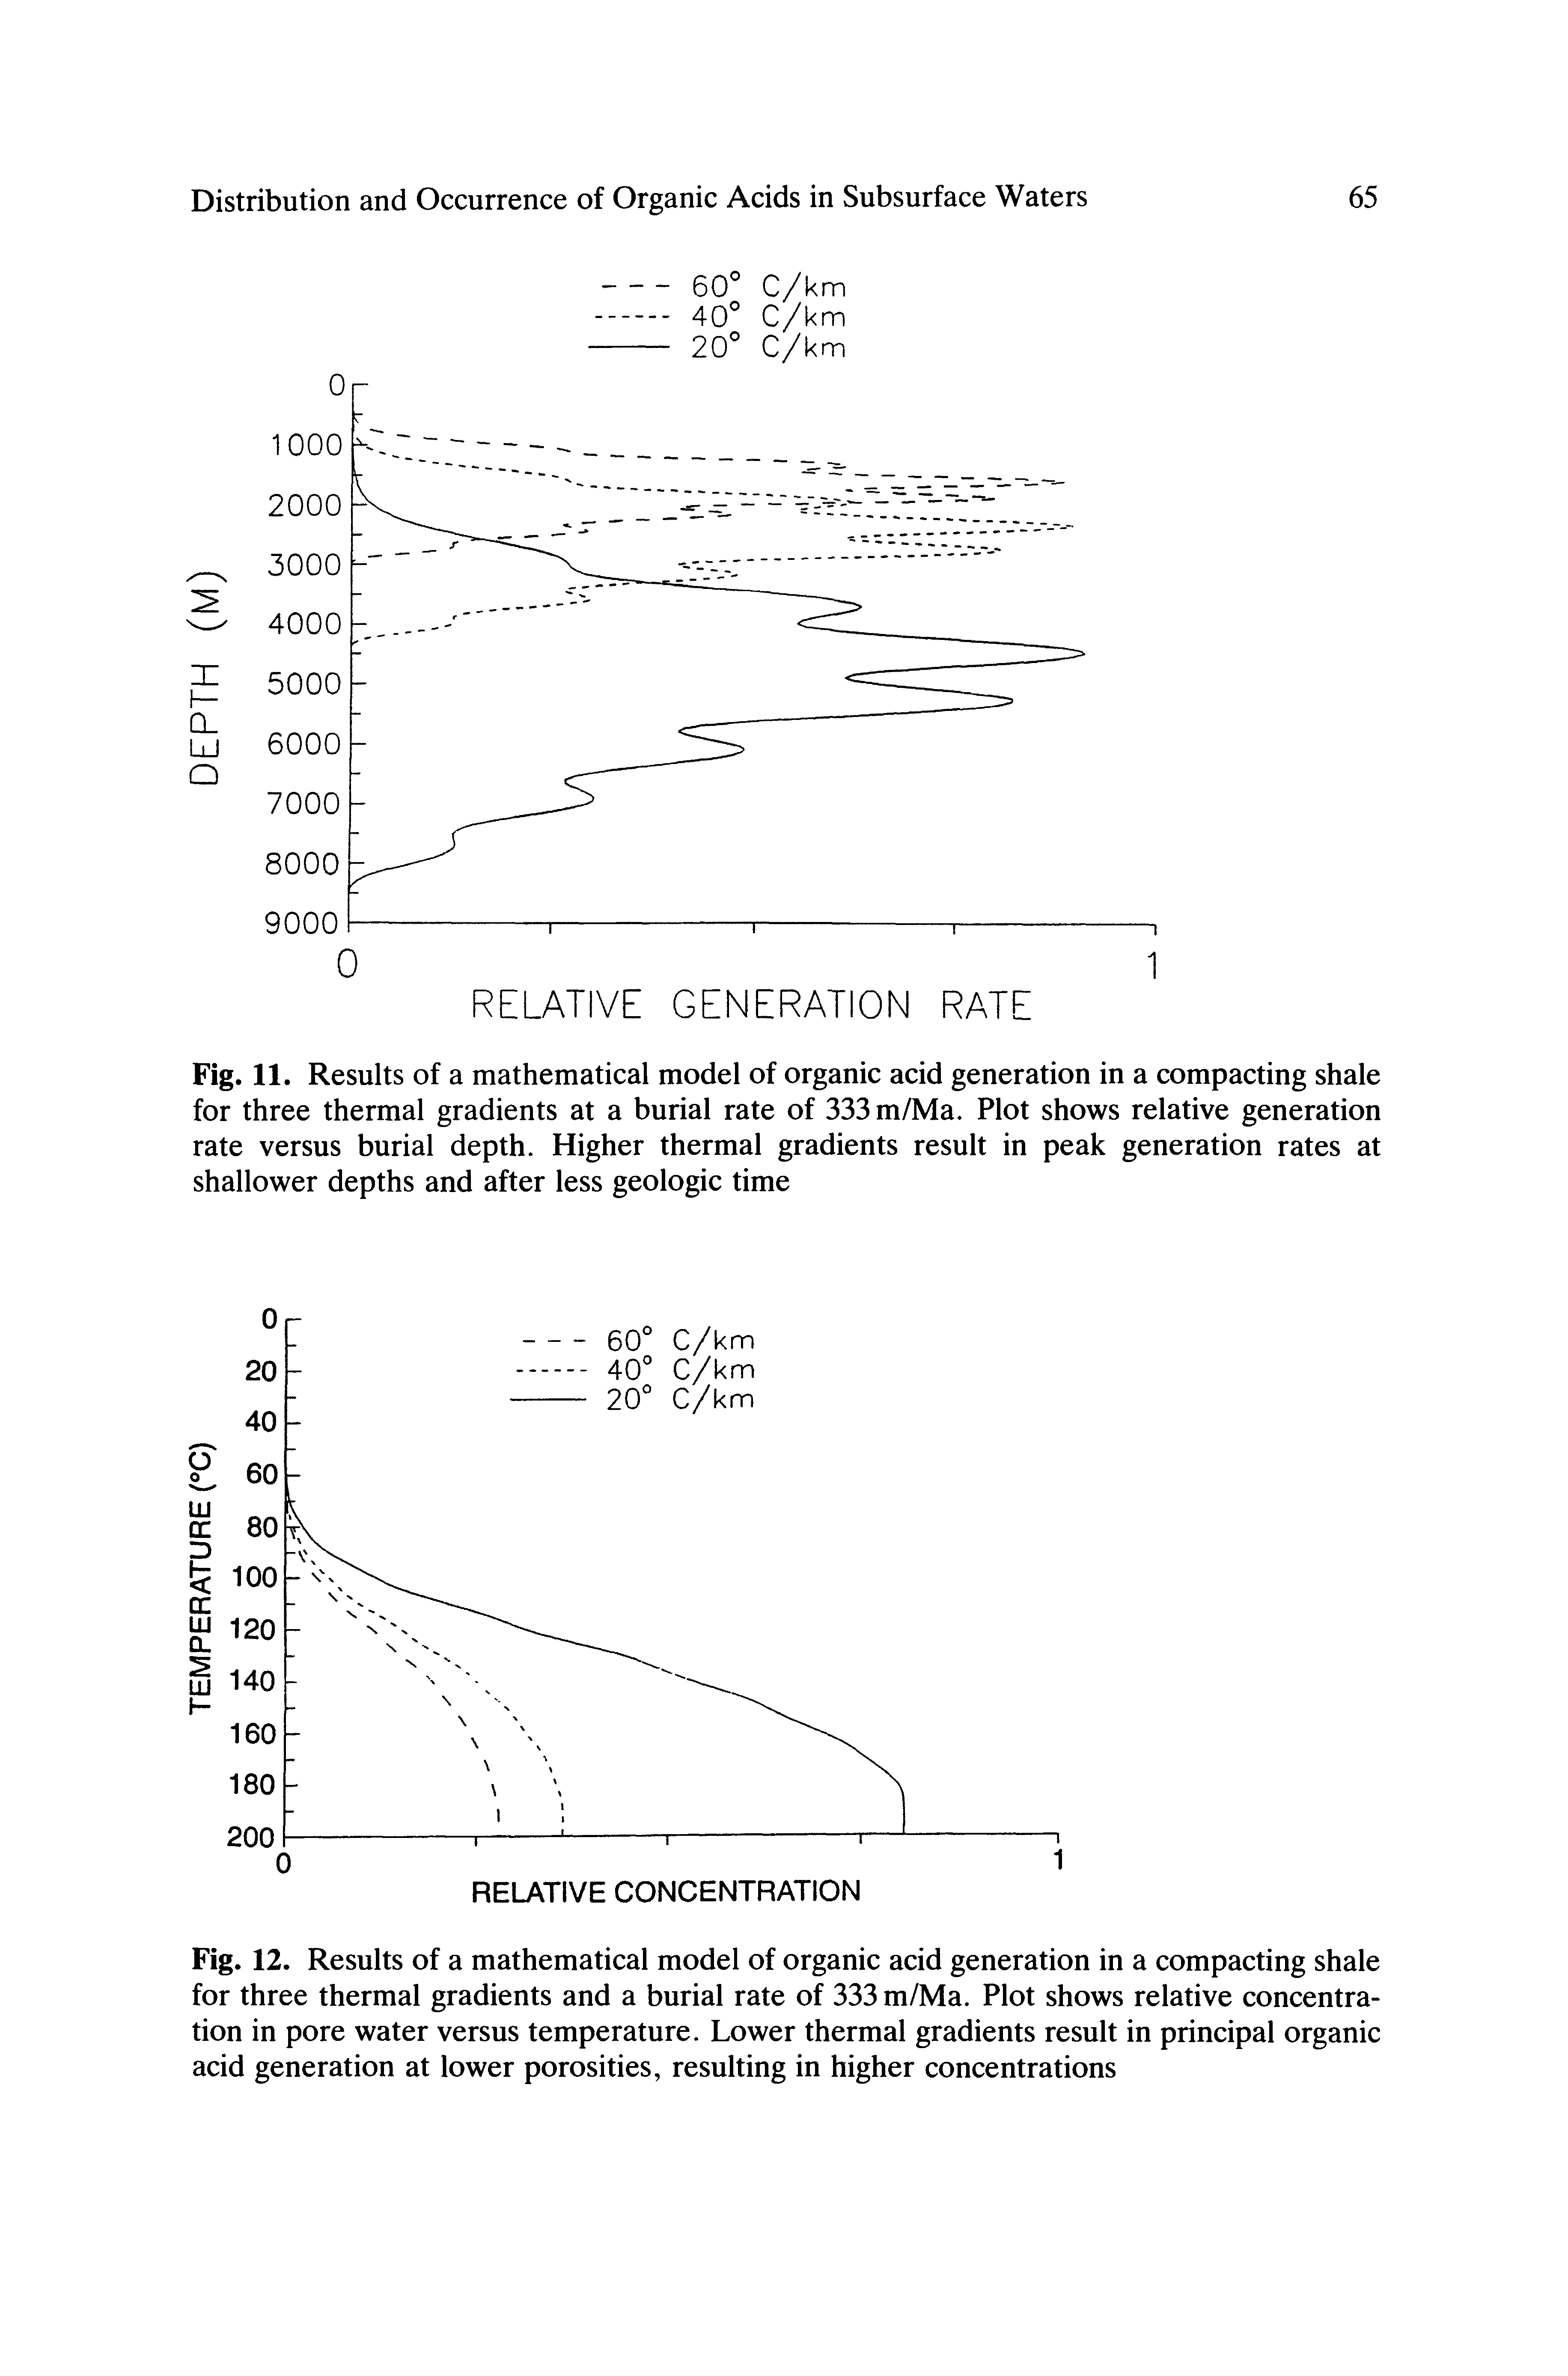 Fig. 12. Results of a mathematical model of organic acid generation in a compacting shale for three thermal gradients and a burial rate of 333 m/Ma. Plot shows relative concentration in pore water versus temperature. Lower thermal gradients result in principal organic acid generation at lower porosities, resulting in higher concentrations...